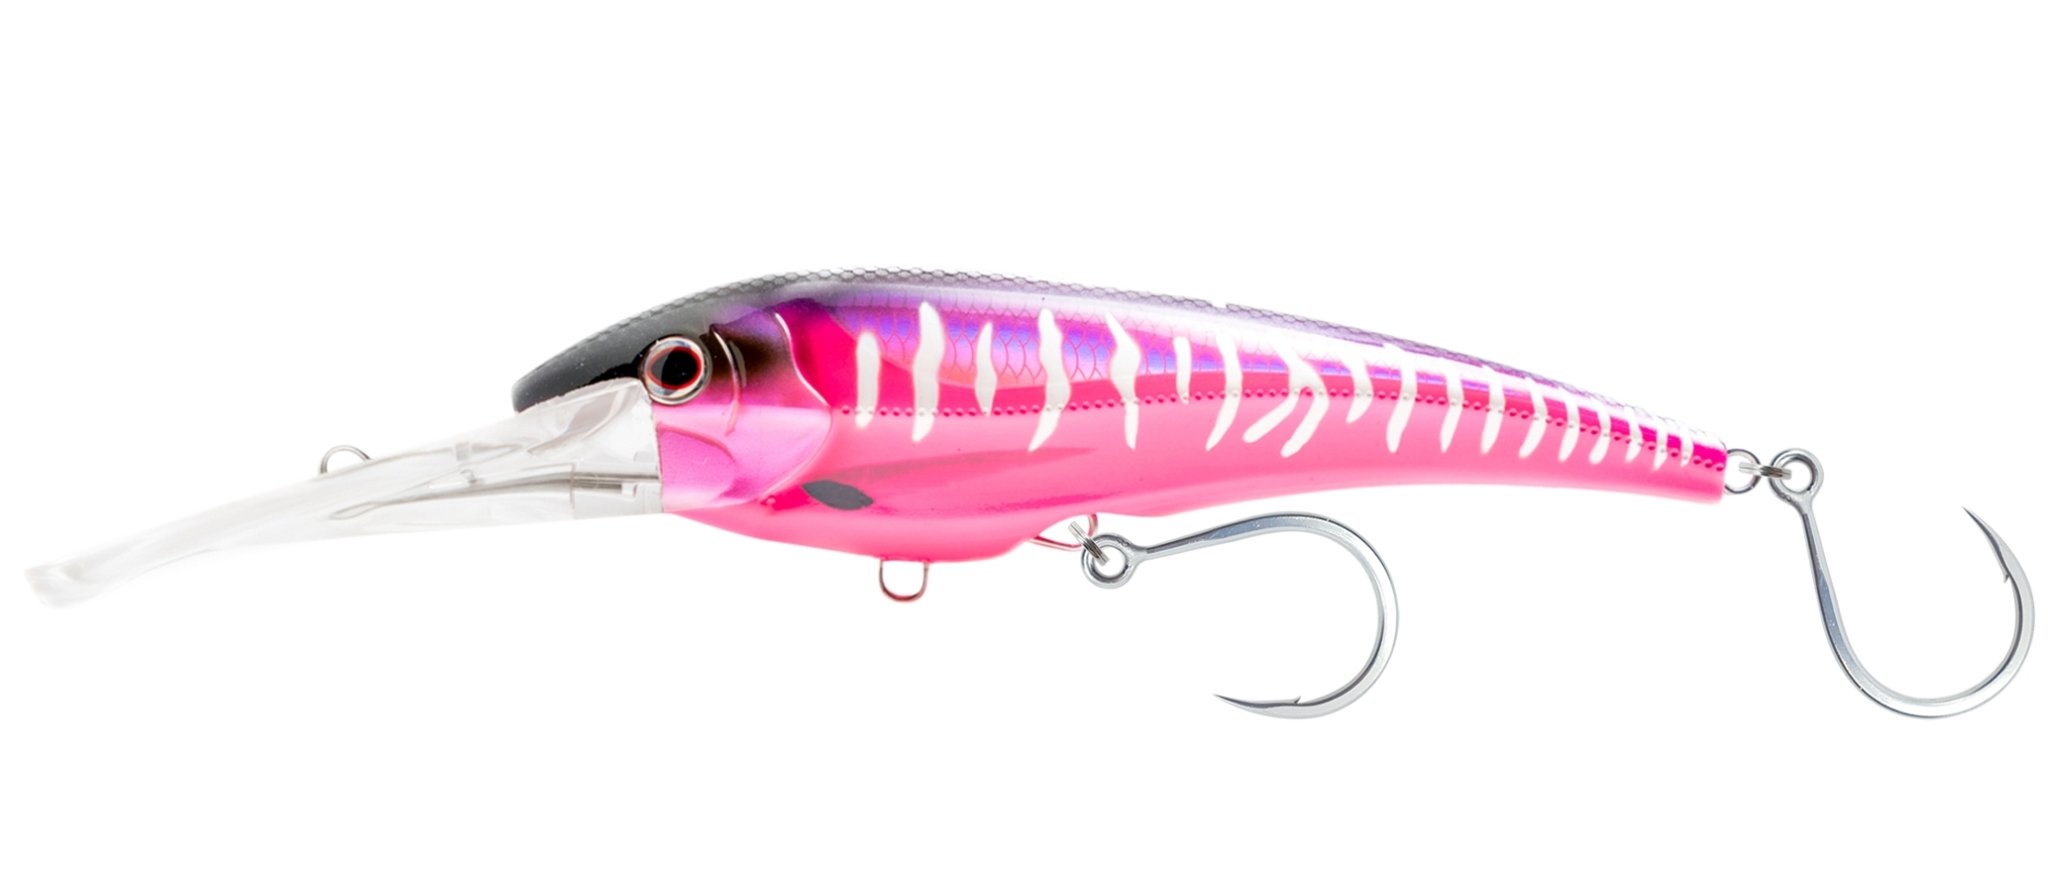 Trolling Lure - Nomad DTX Minnow 165MM/35ft - The Fishermans Hut